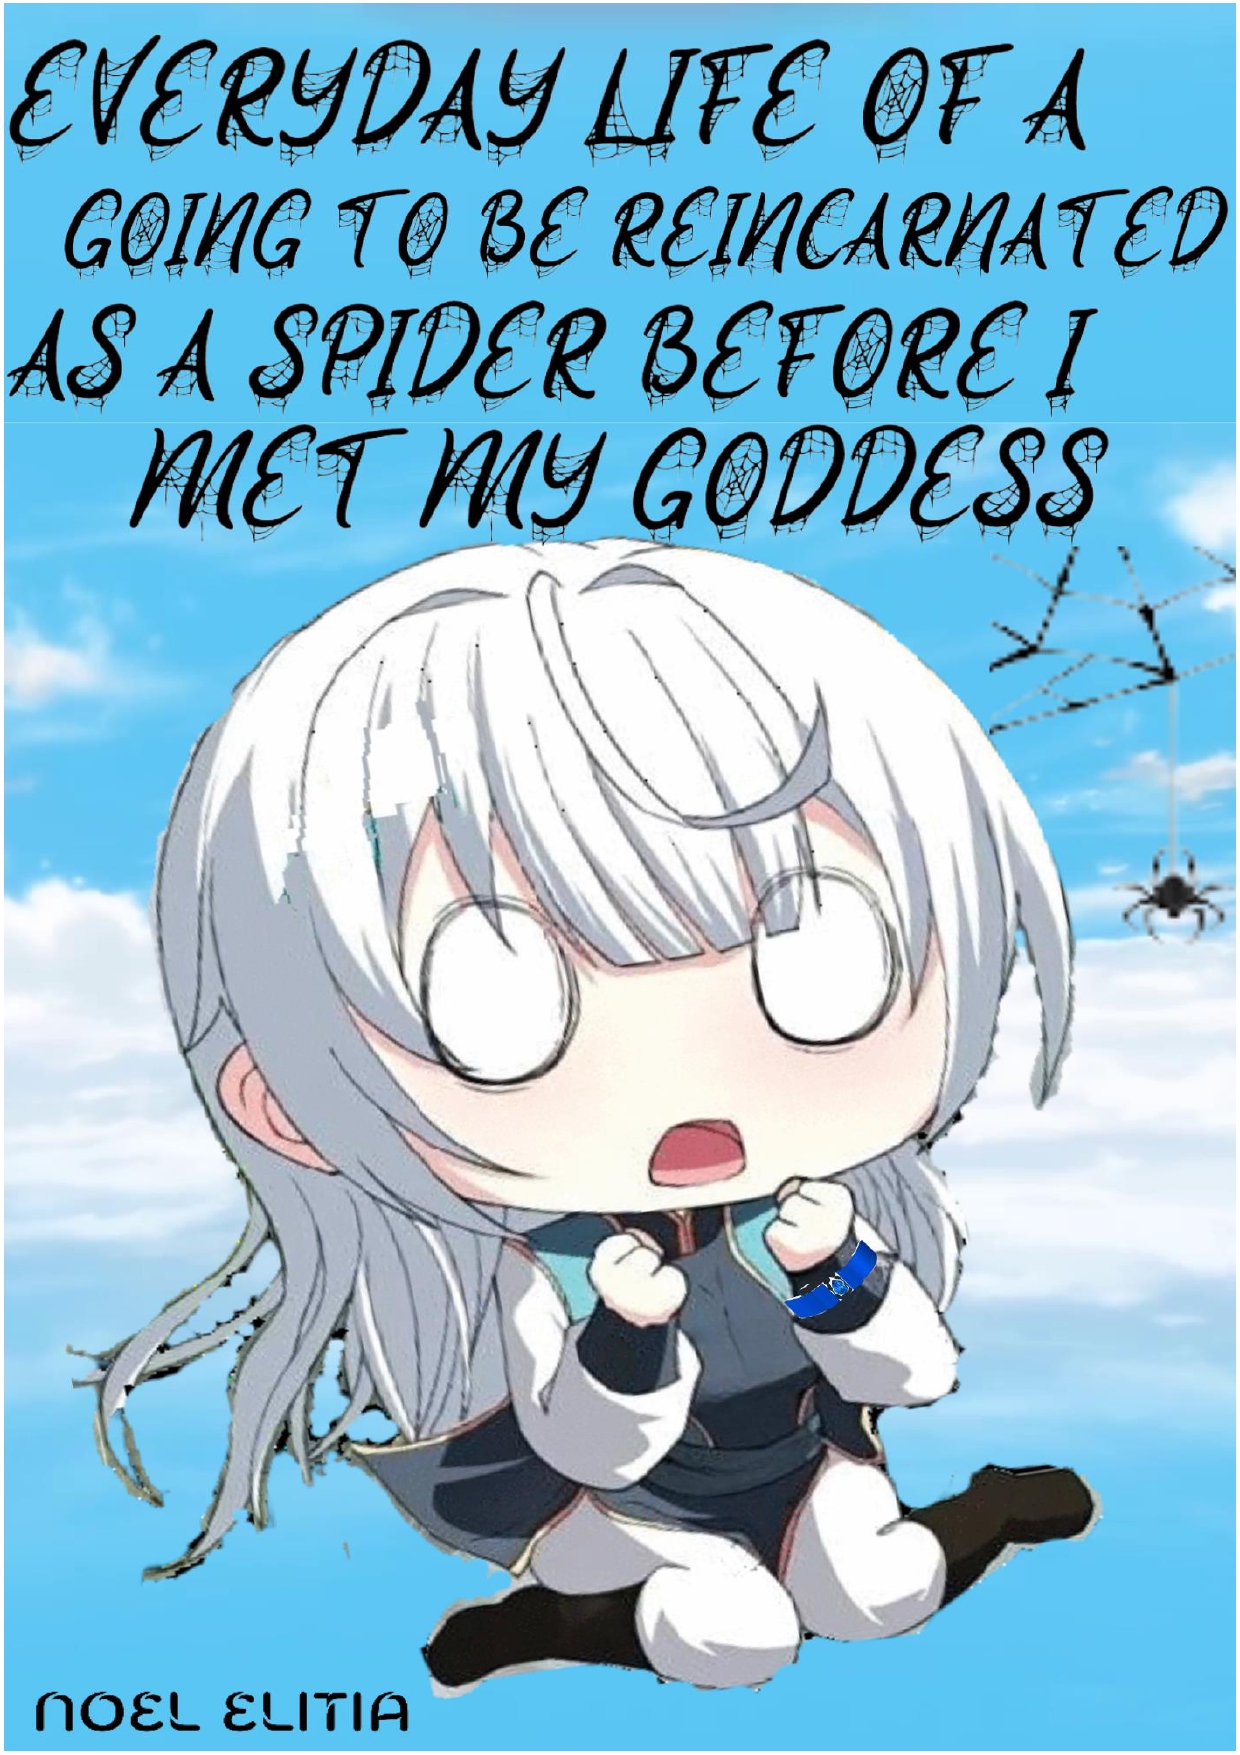 When I Got Reincarnated as a Spider With My Goddess 1